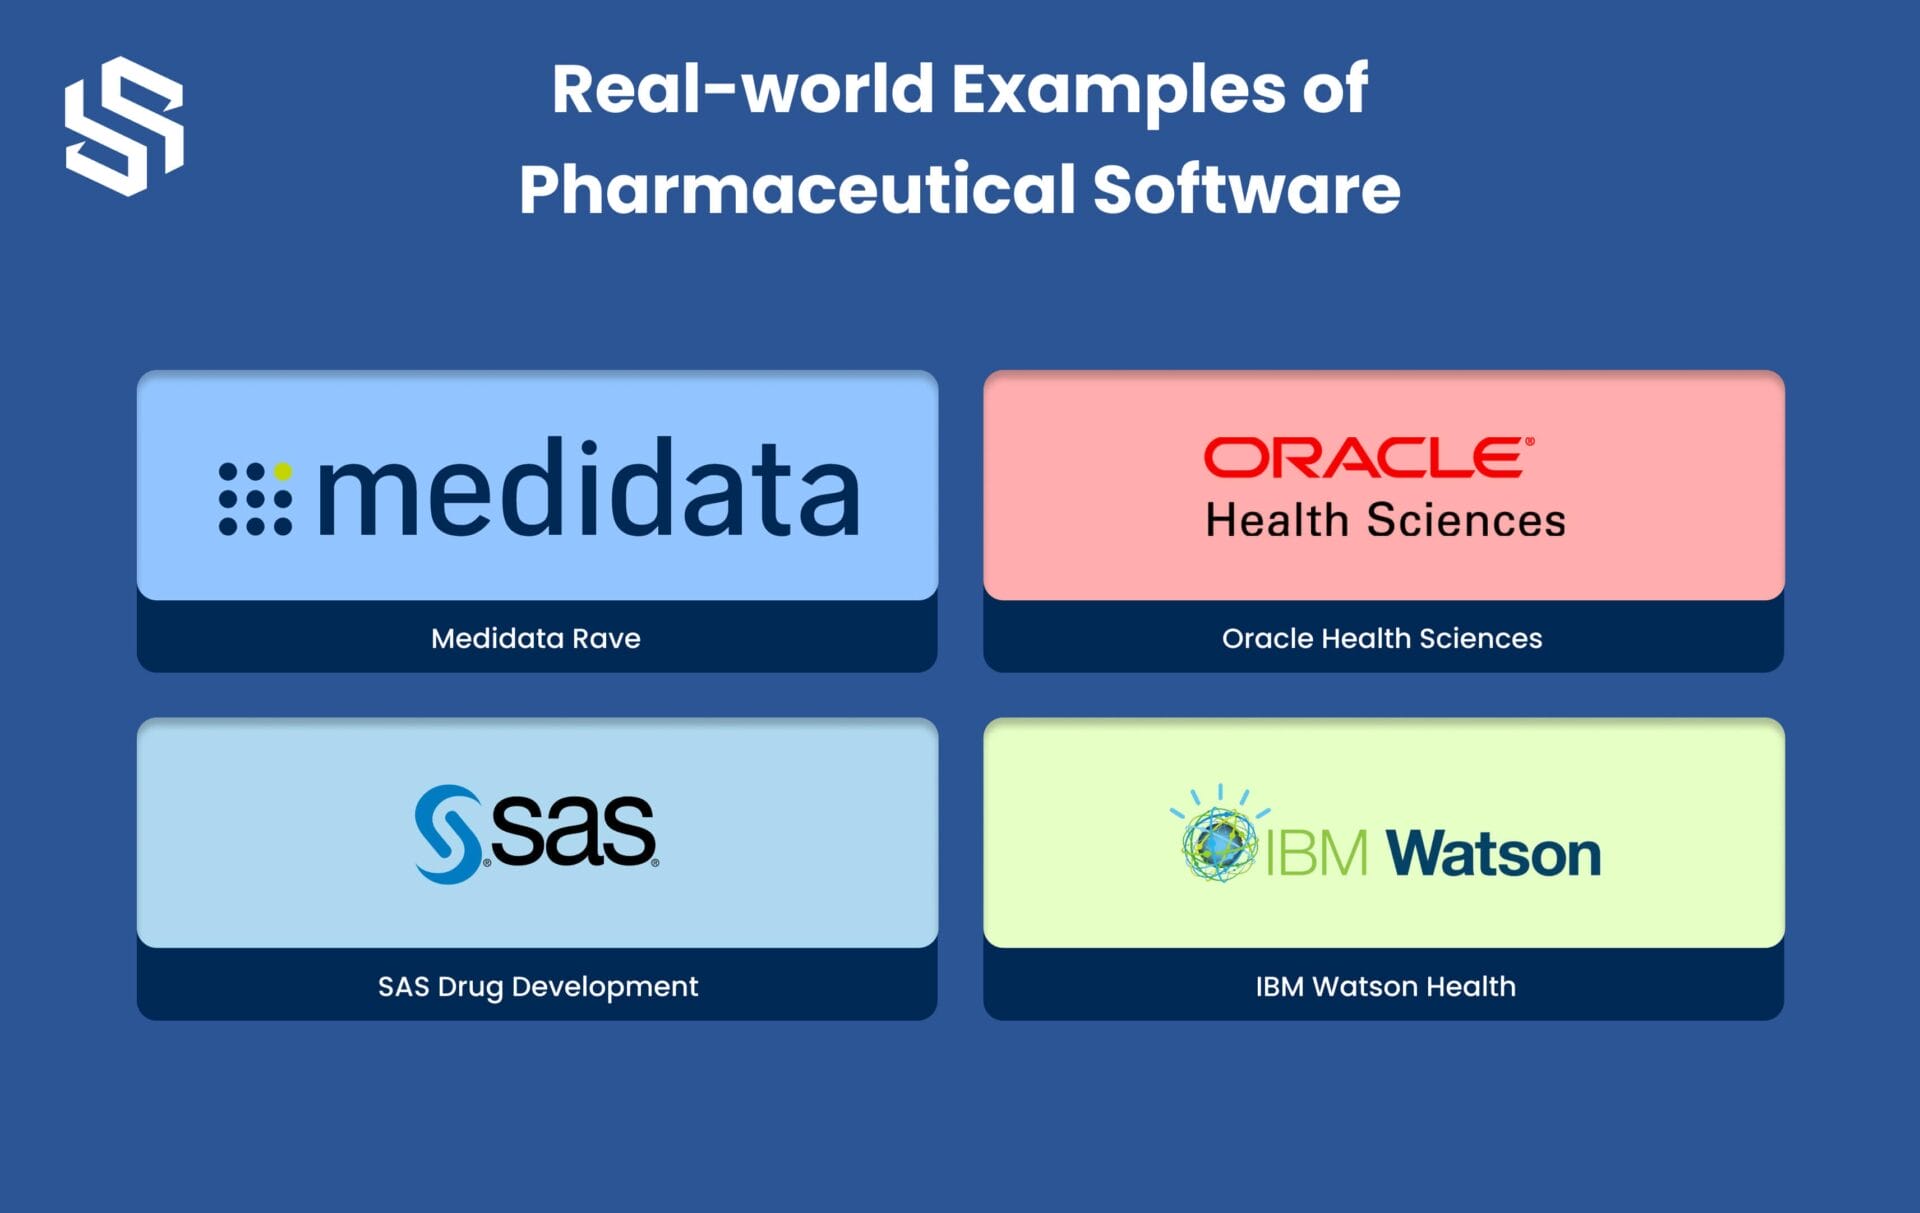 Real-world Examples of Pharmaceutical Software